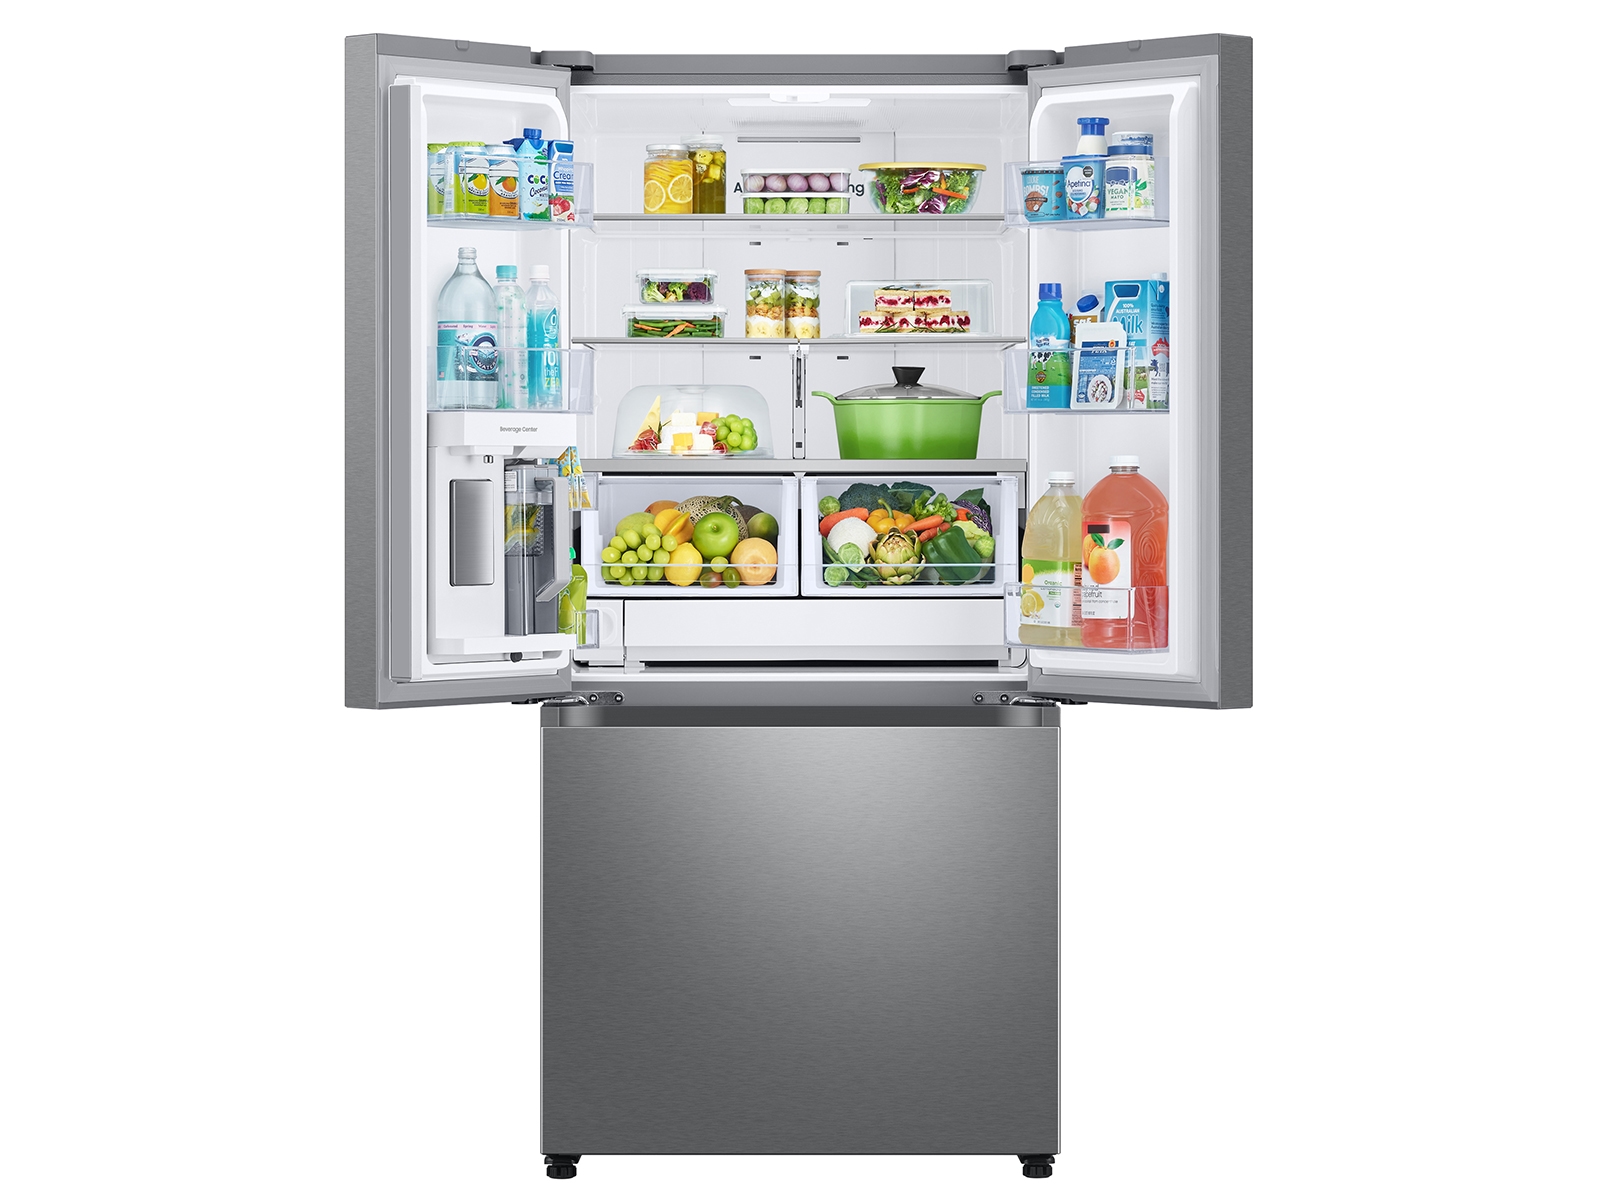 What temperature should I set my Samsung refrigerator to?